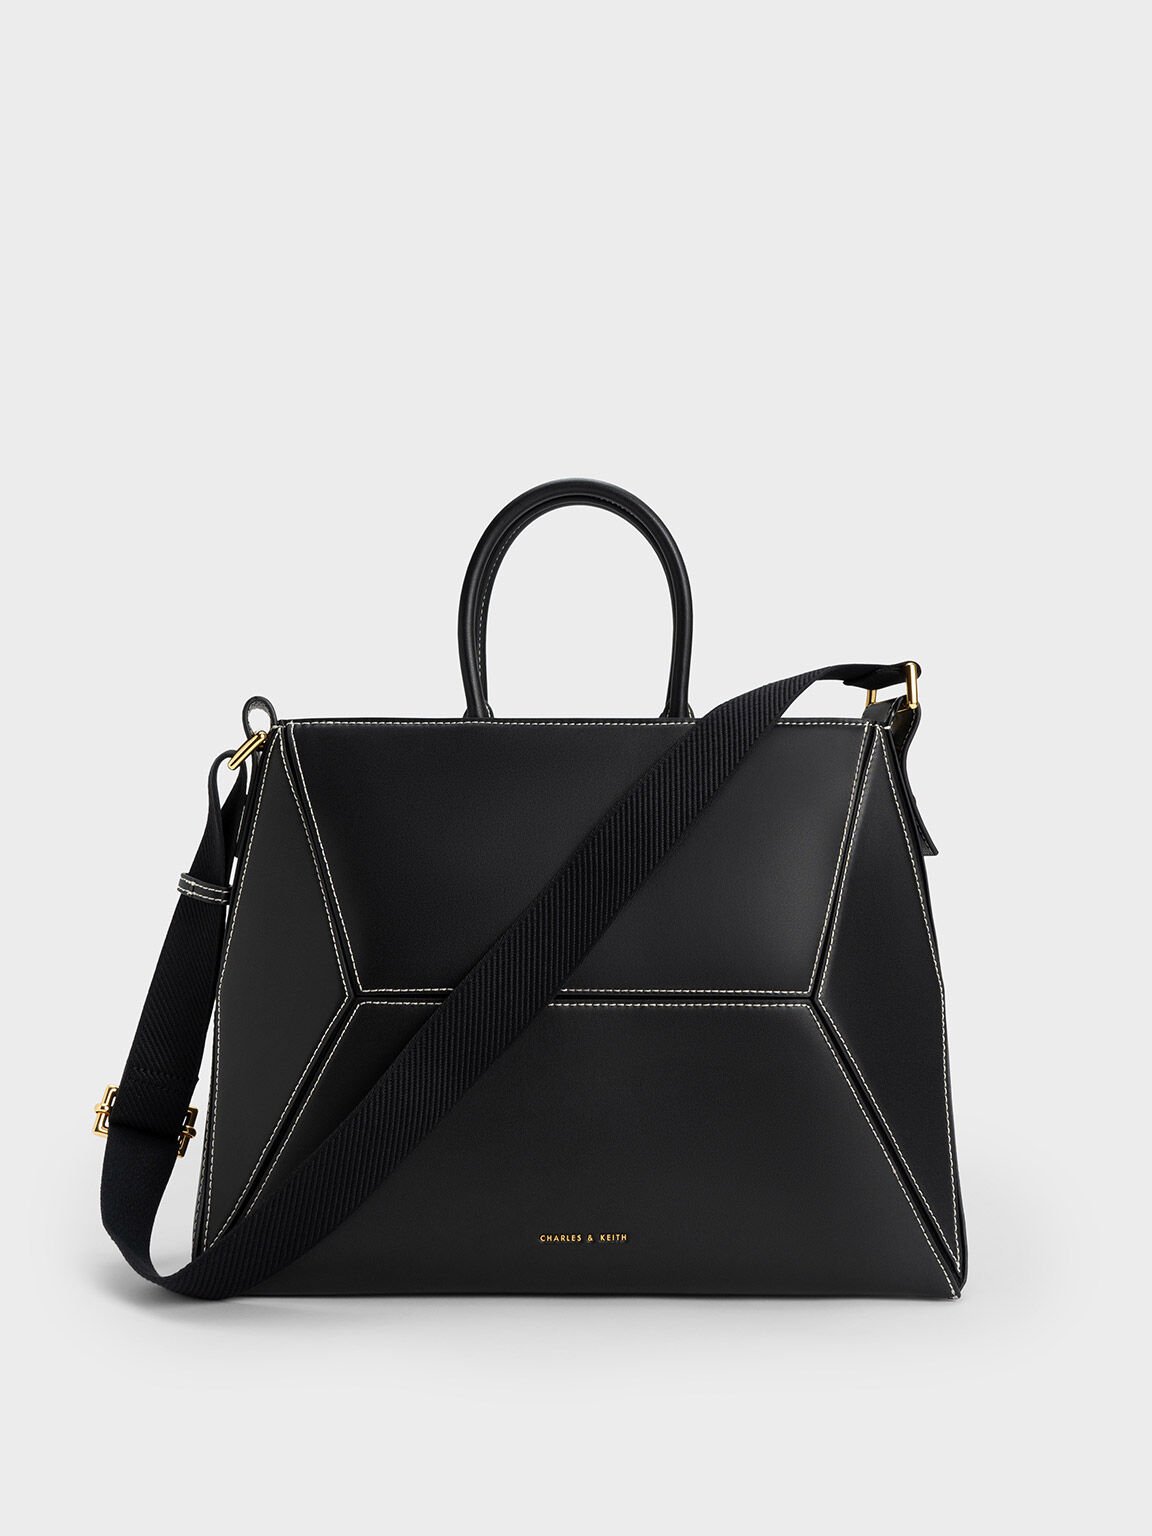 Shop Women's Canvas Bags  Spring 2023 - CHARLES & KEITH US